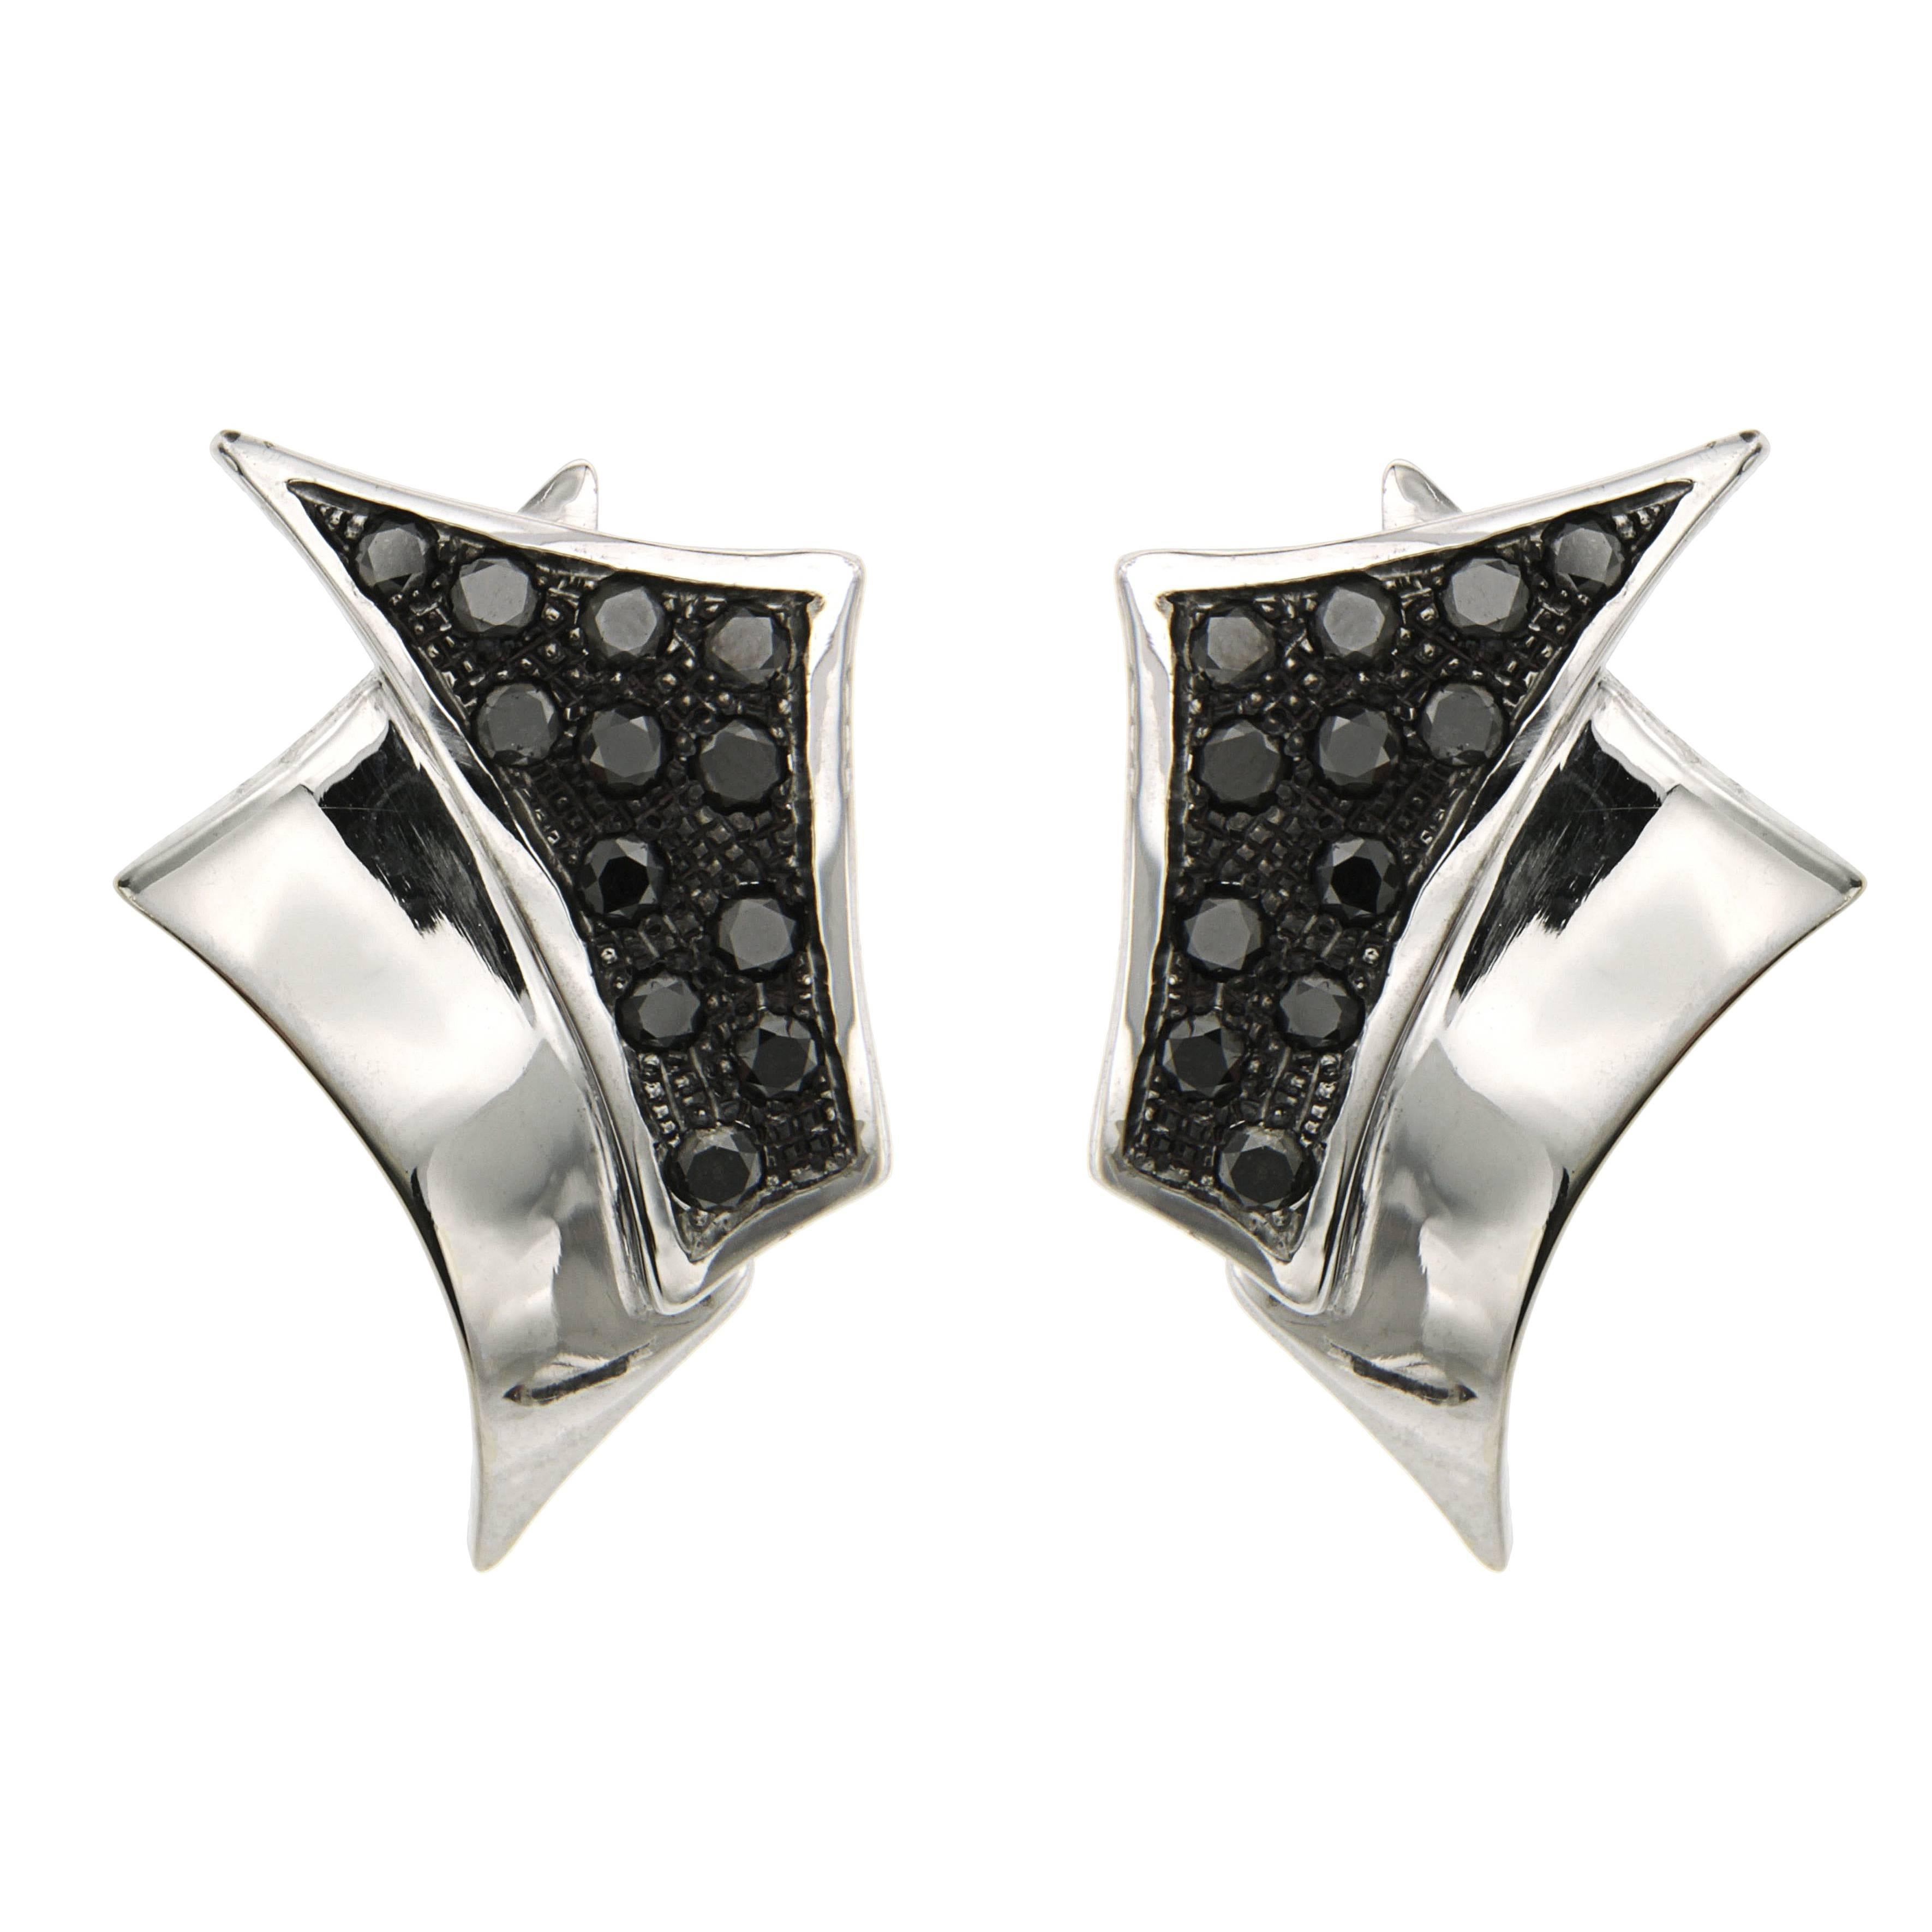 Black Diamonds 18k White Gold Earrings Handcrafted in Italy by Botta Gioielli For Sale